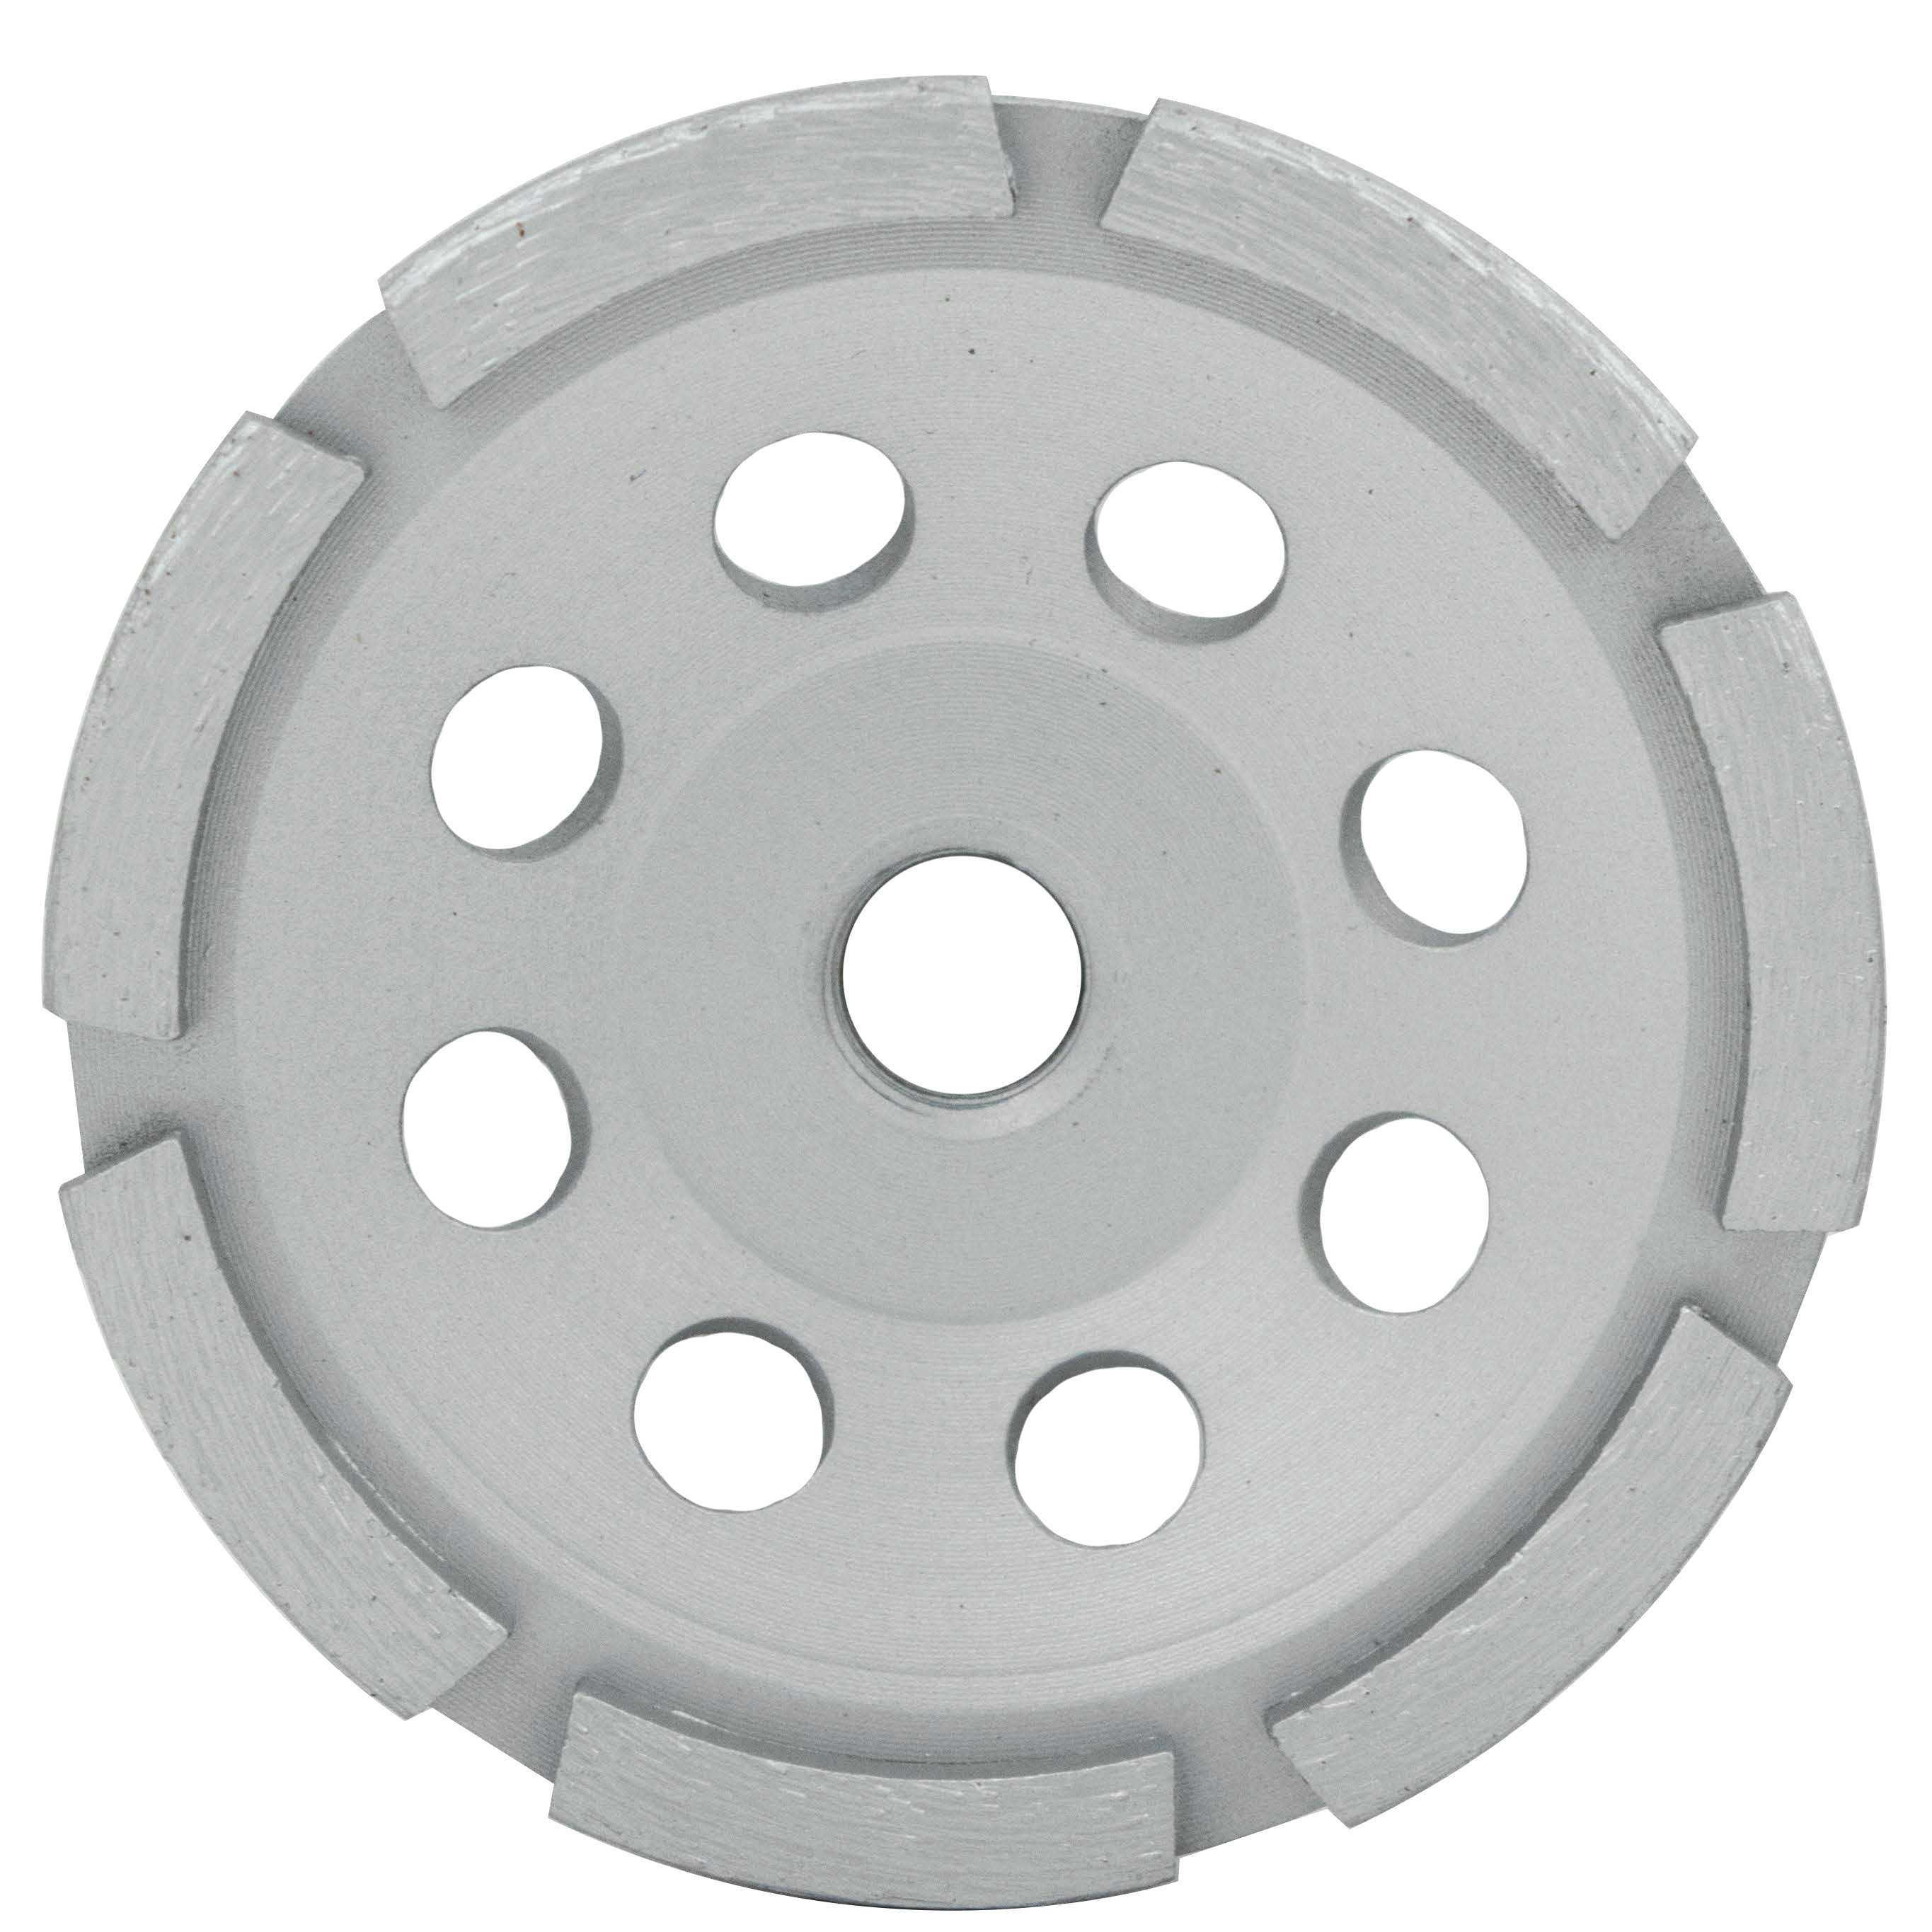 Milwaukee diamond cup wheels are designed to the highest standards, only using quality diamonds. Available in sizes 4 in., 5 in., and 7 in., single-row cup wheels are designed for fast removal, shaping, and smoothing of concrete, masonry, and stone. Milwaukee provides cup wheels in single-row, double-row, and segmented-turbo.